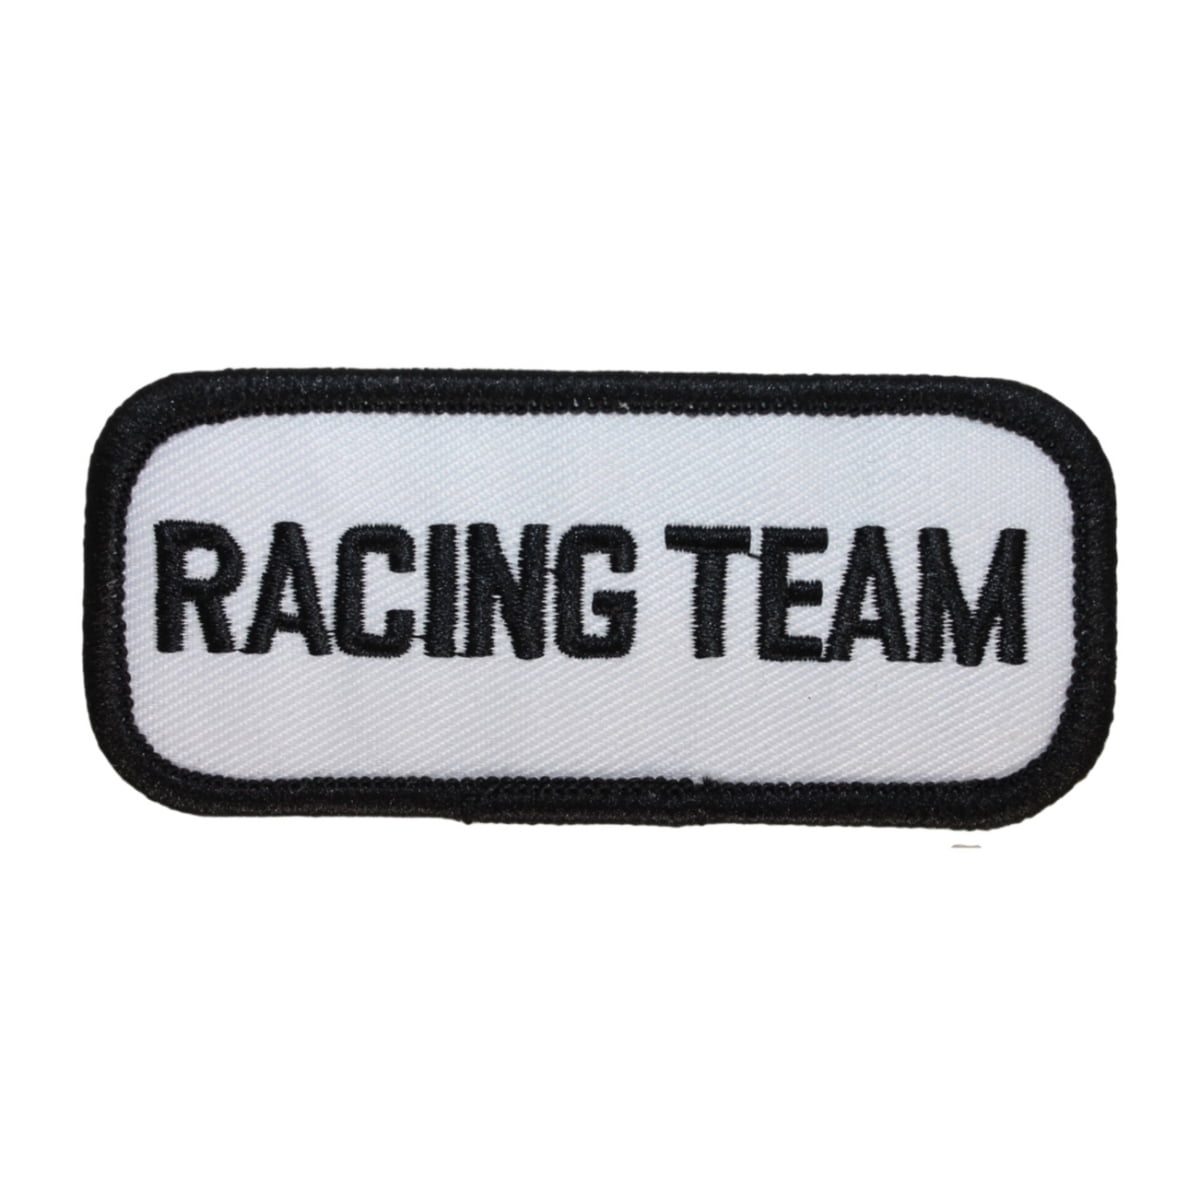 Greddy Car Tunning Patch Iron On Patch Sew On Embroidered Patch 